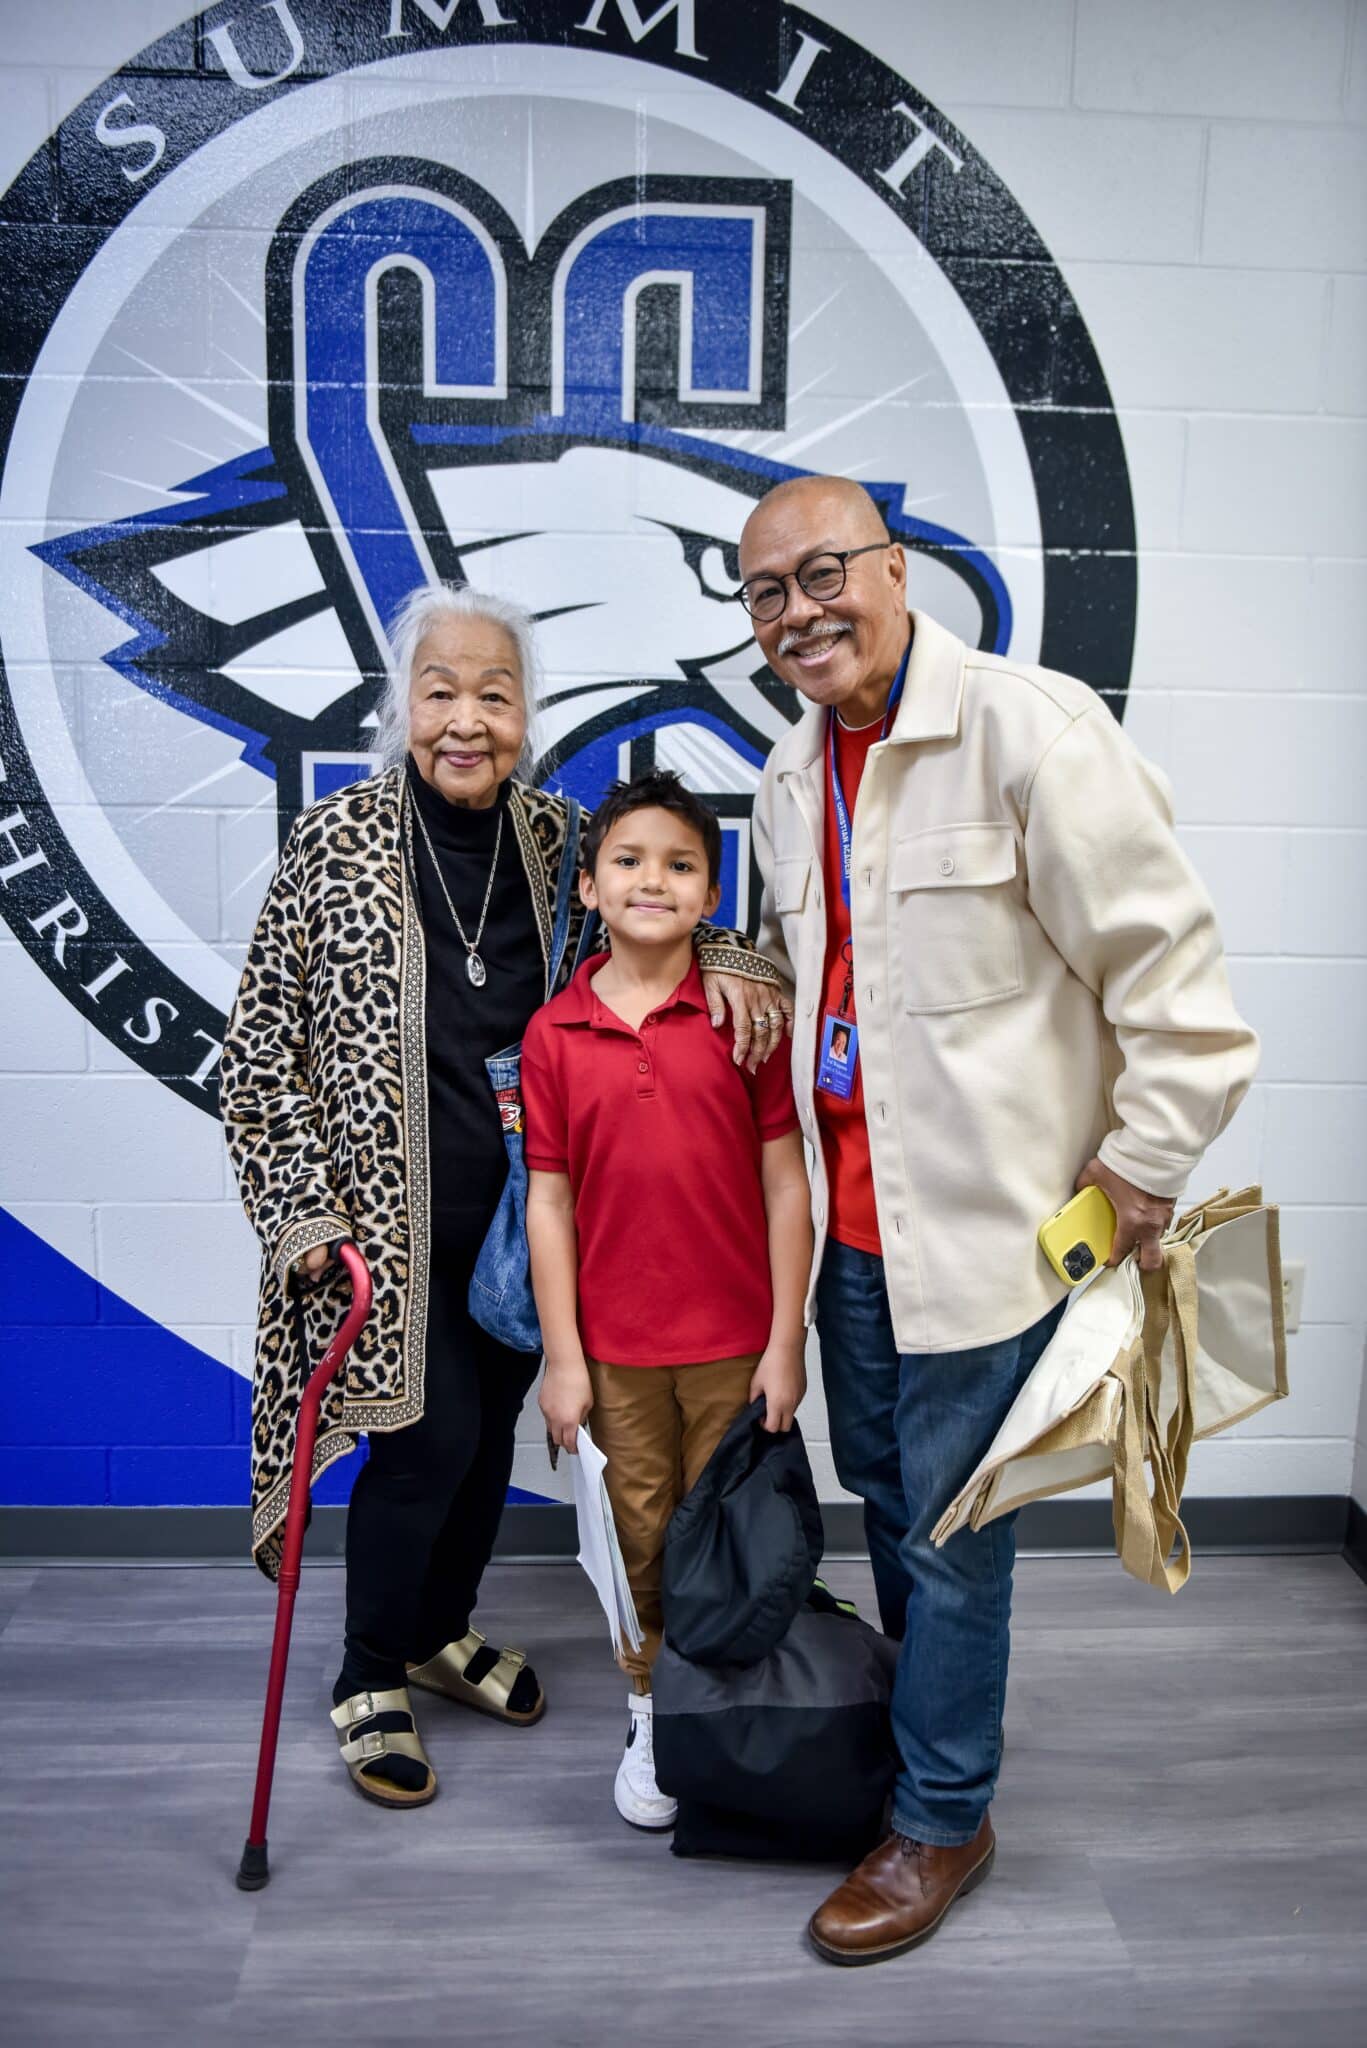 SCA first grade student Isaiah Bagunu enjoys getting picked up from the half-day of school by his father and grandmother on Grandparents’ Day.